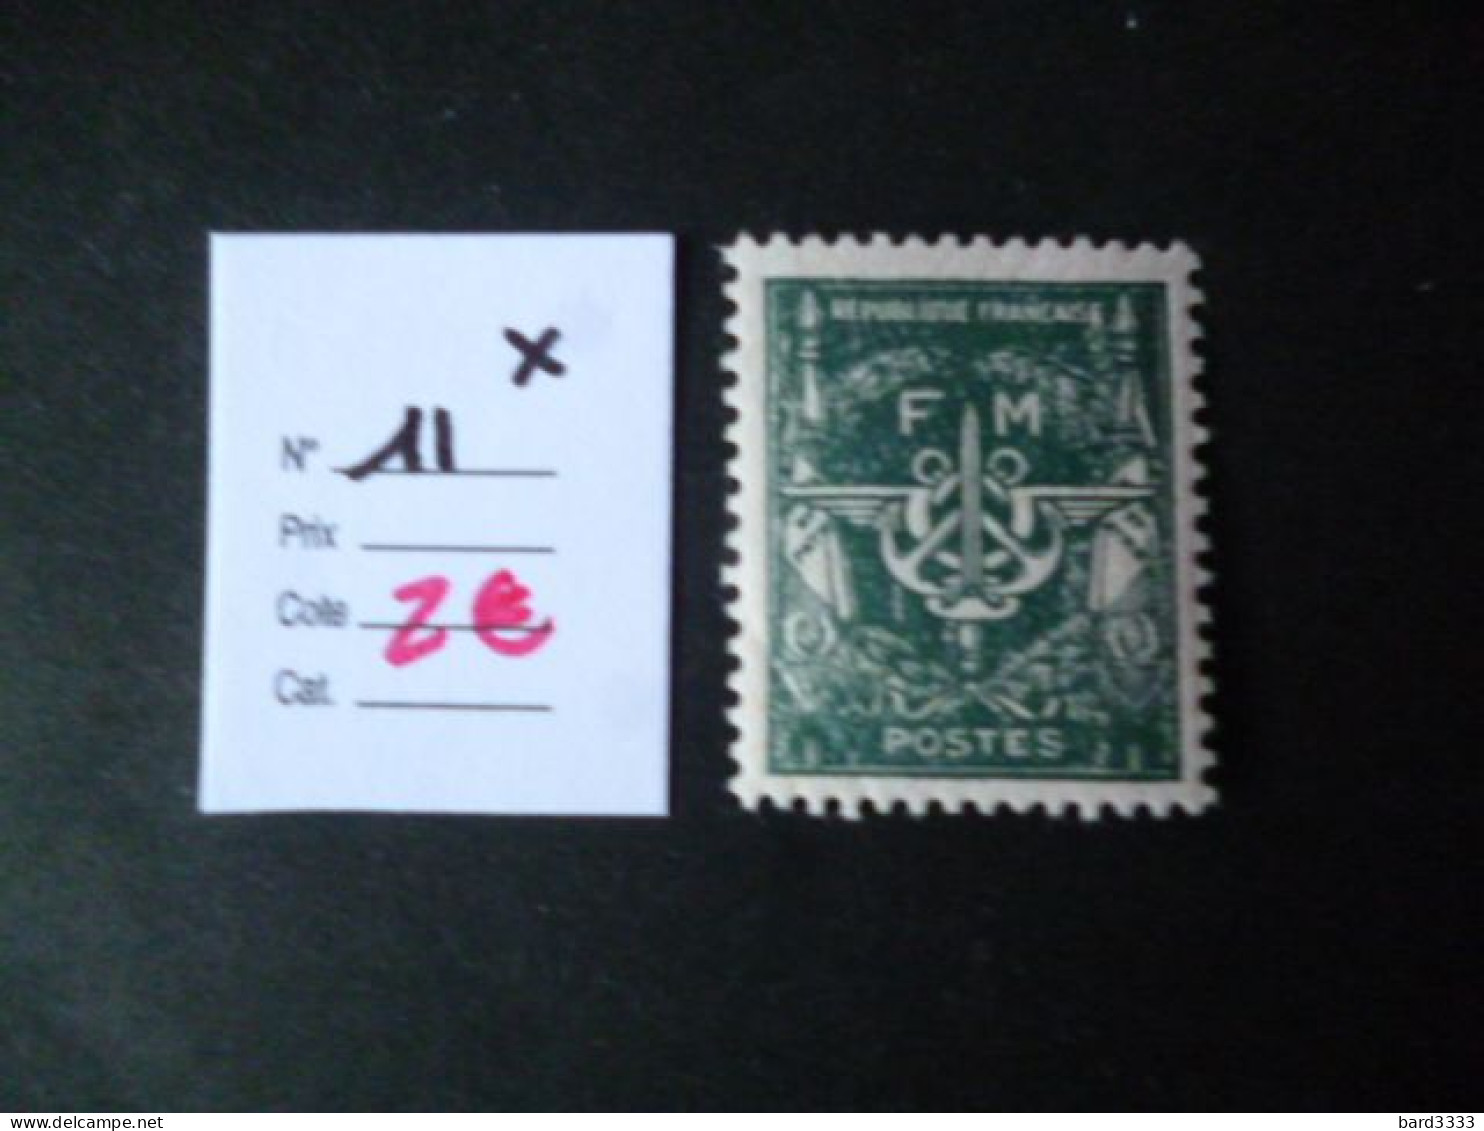 Timbre France Neuf * Franchise N° 11 Cote 2 € - Military Postage Stamps